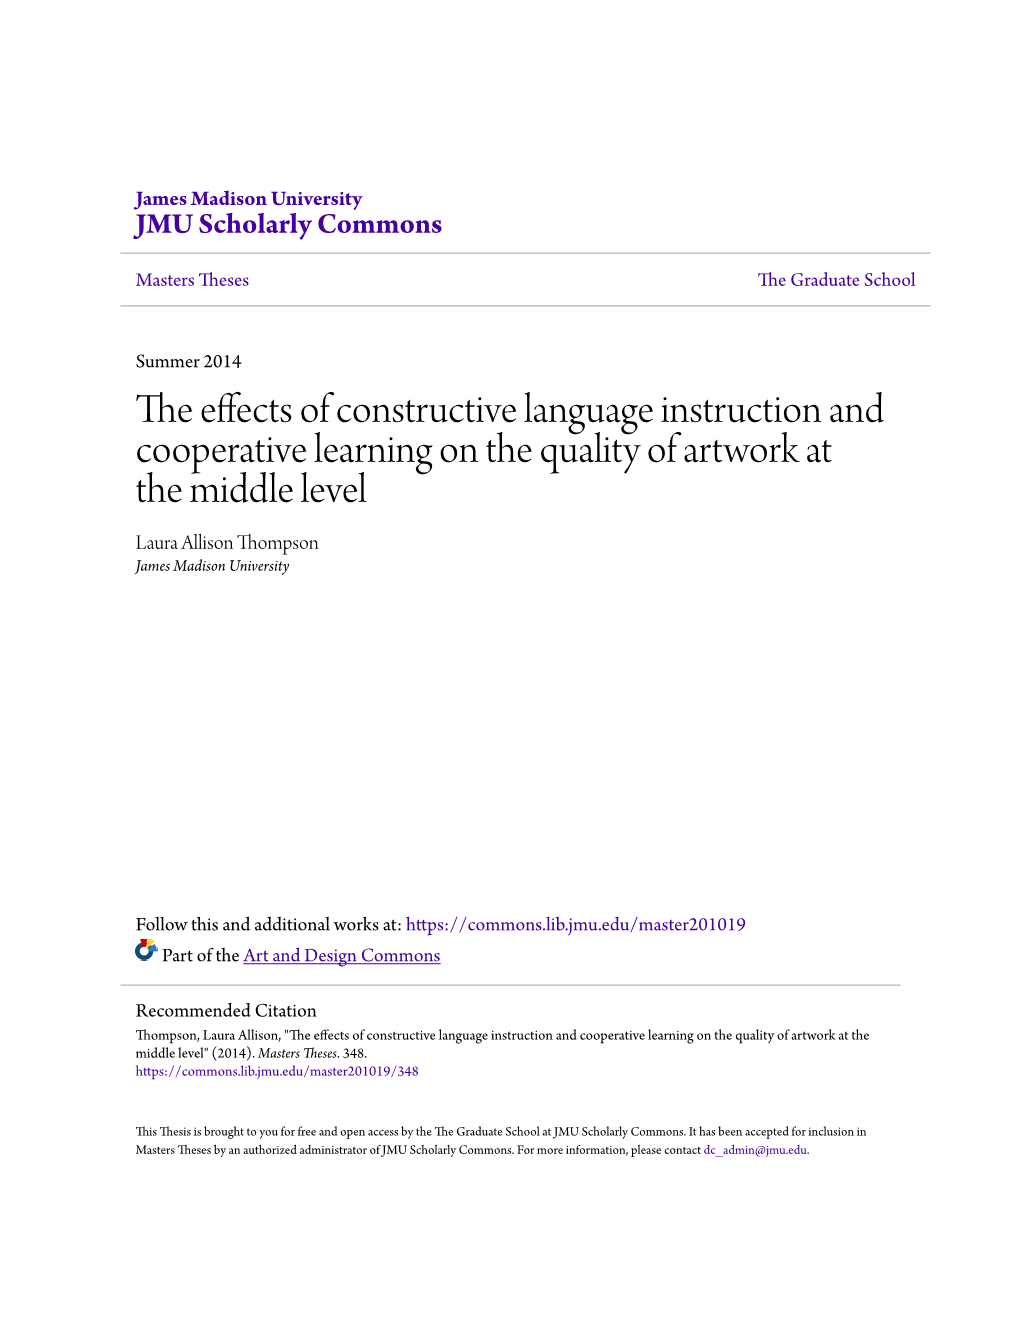 The Effects of Constructive Language Instruction and Cooperative Learning